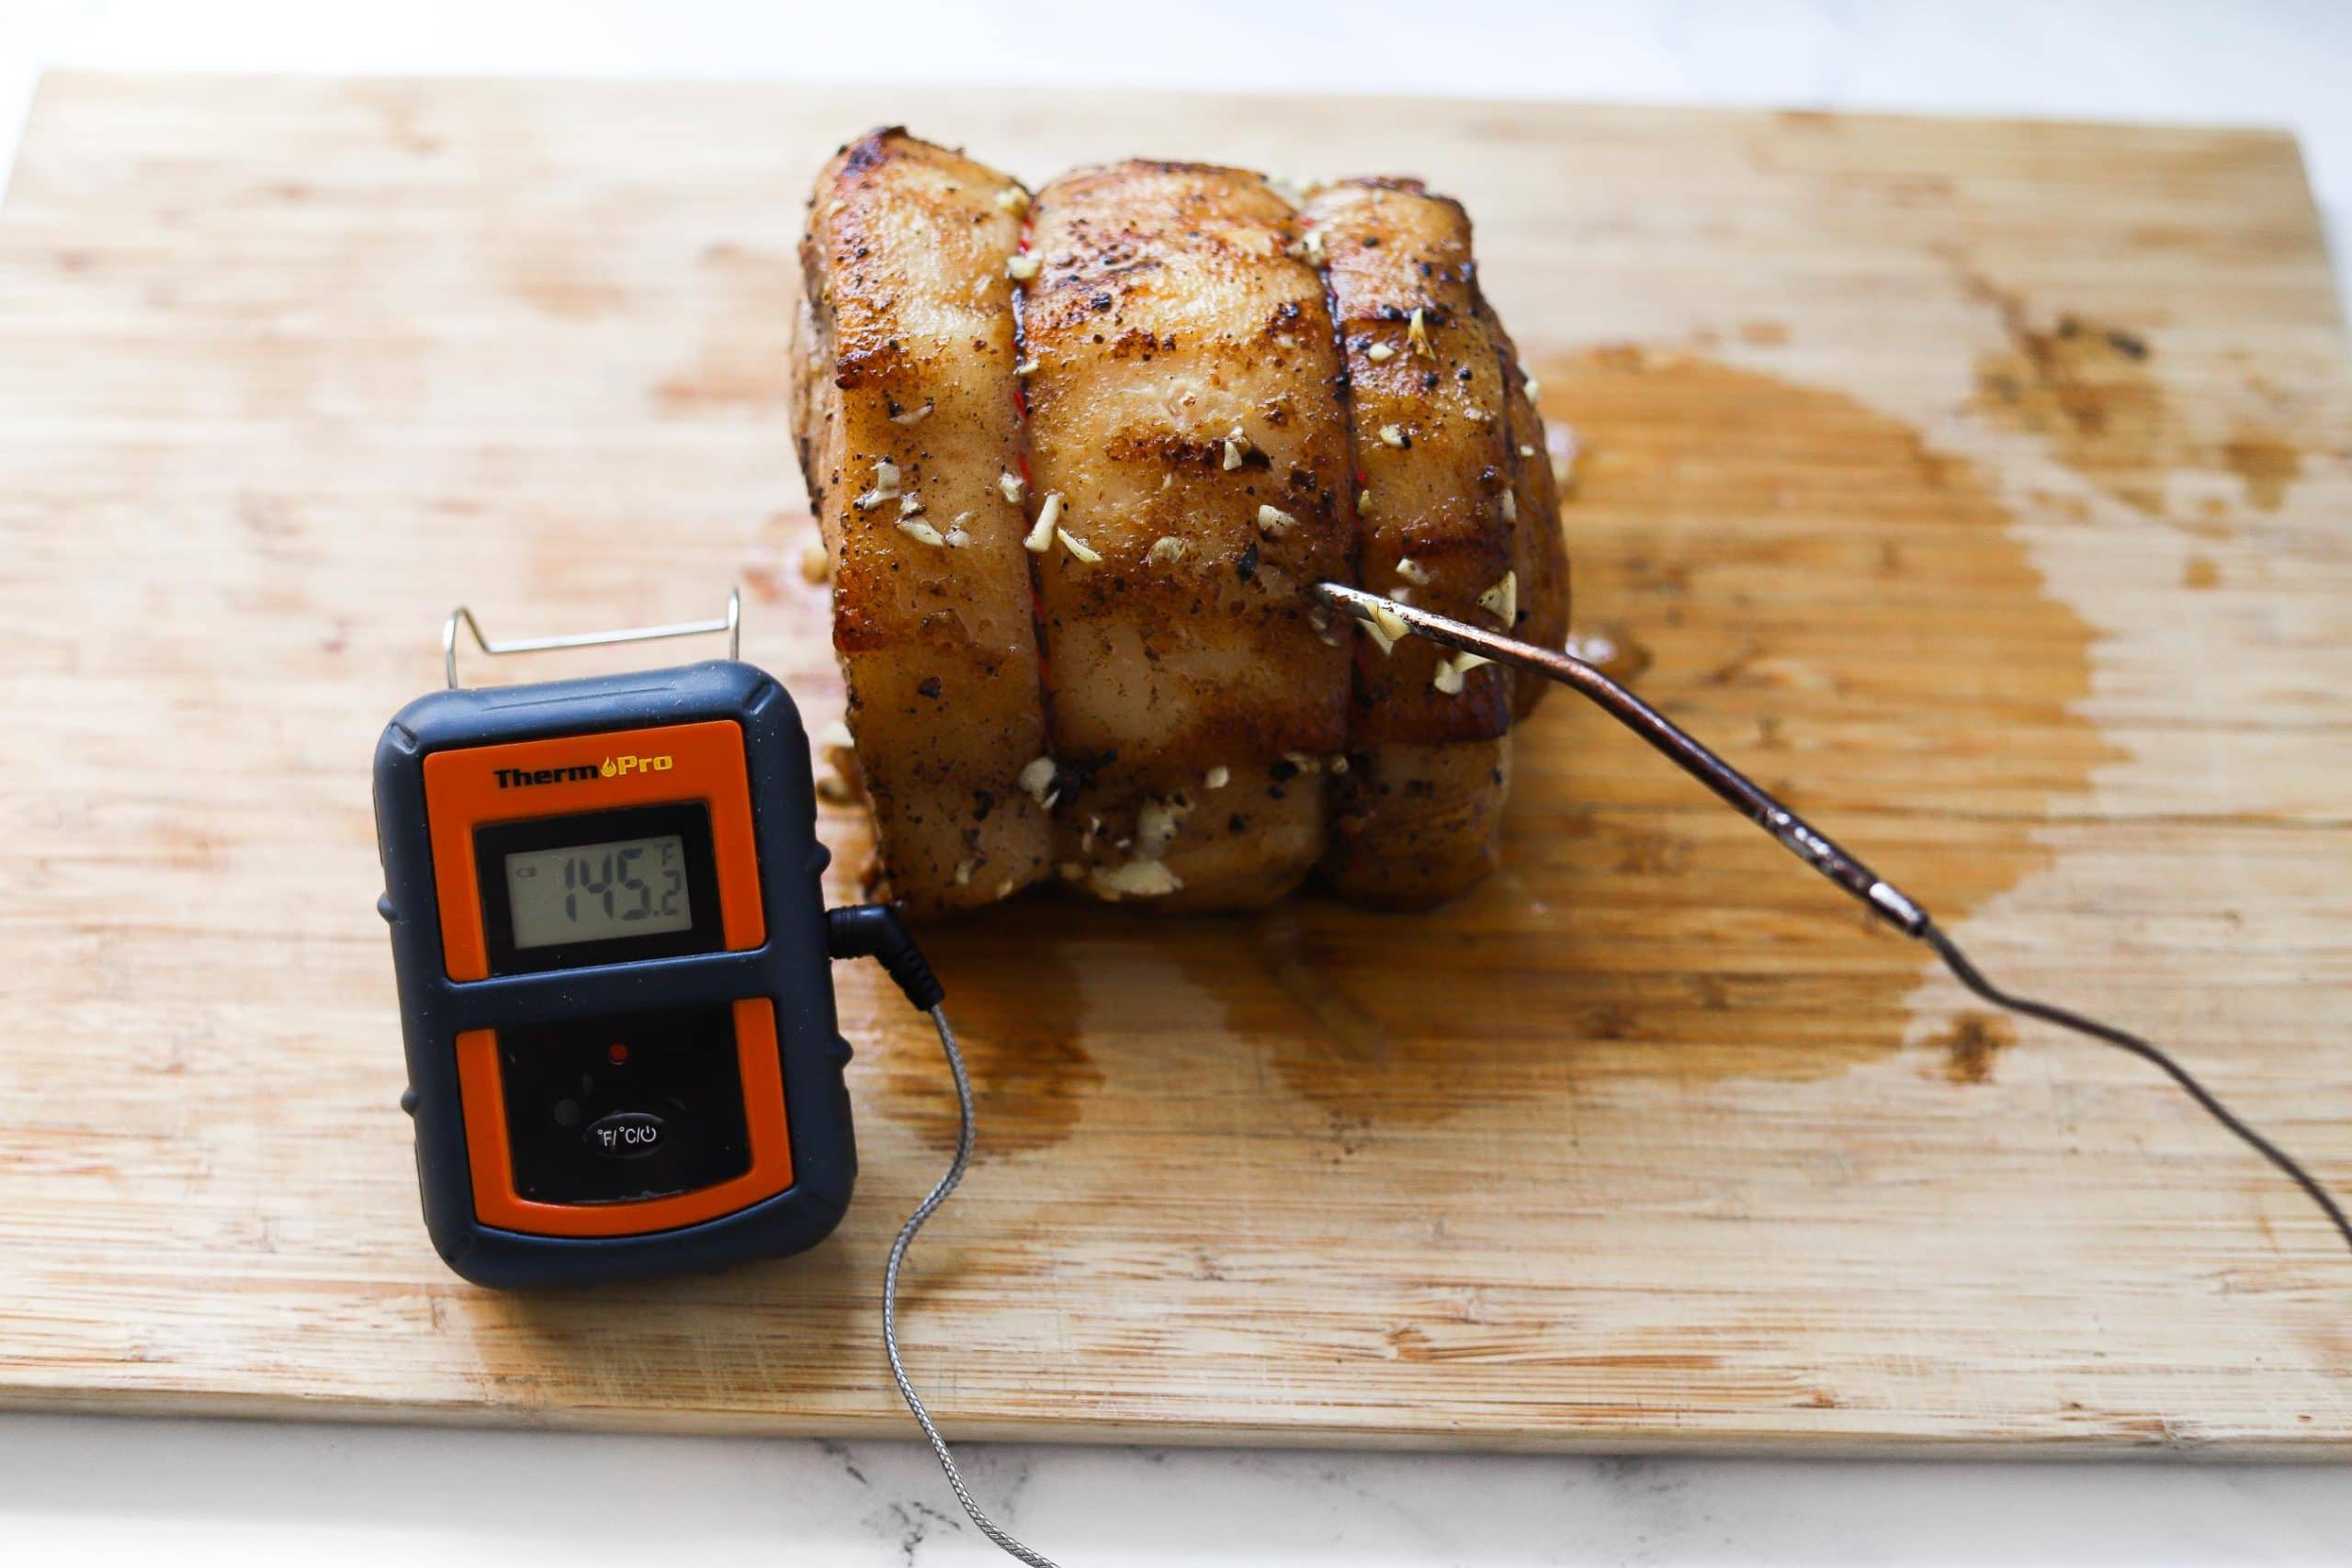 pork loin cooked and resting on cutting board with thermometer showing 145 degrees F